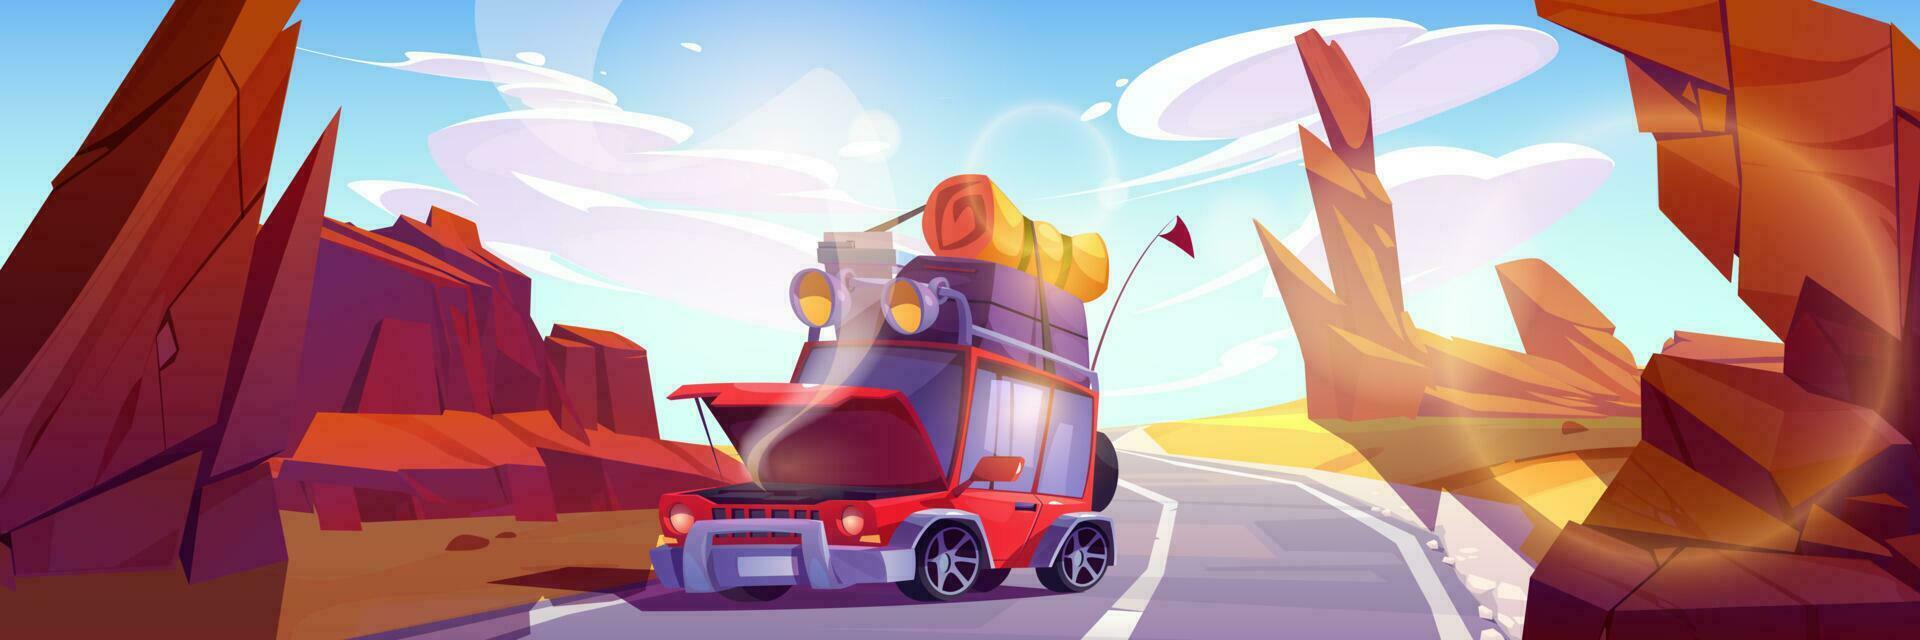 Broken car at desert roadtrip with baggage on roof vector